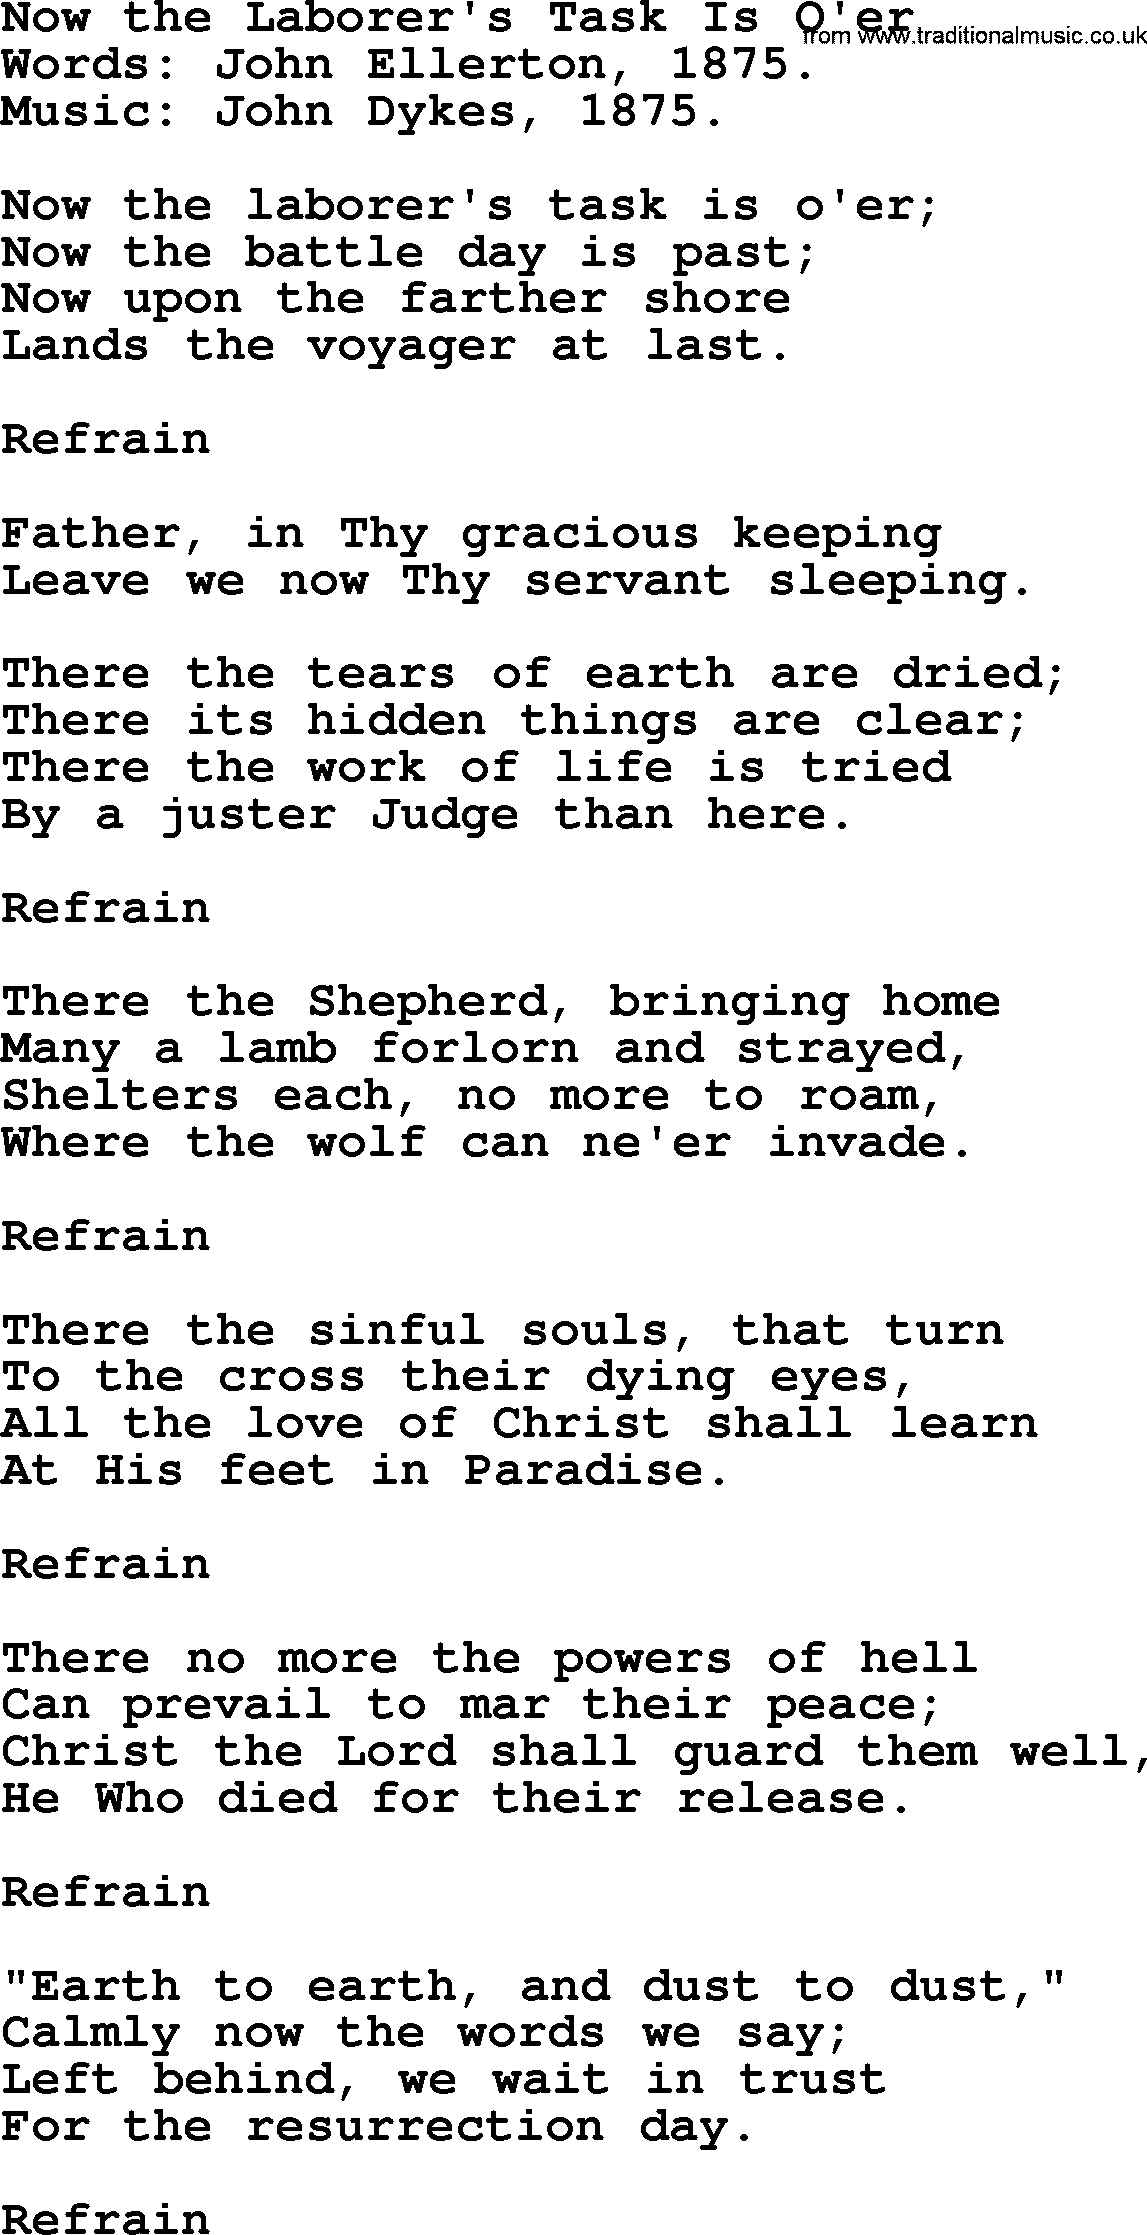 100+ Christian Funeral Hymns collection, Hymn: Now the Laborer's Task Is O'er, lyrics and PDF